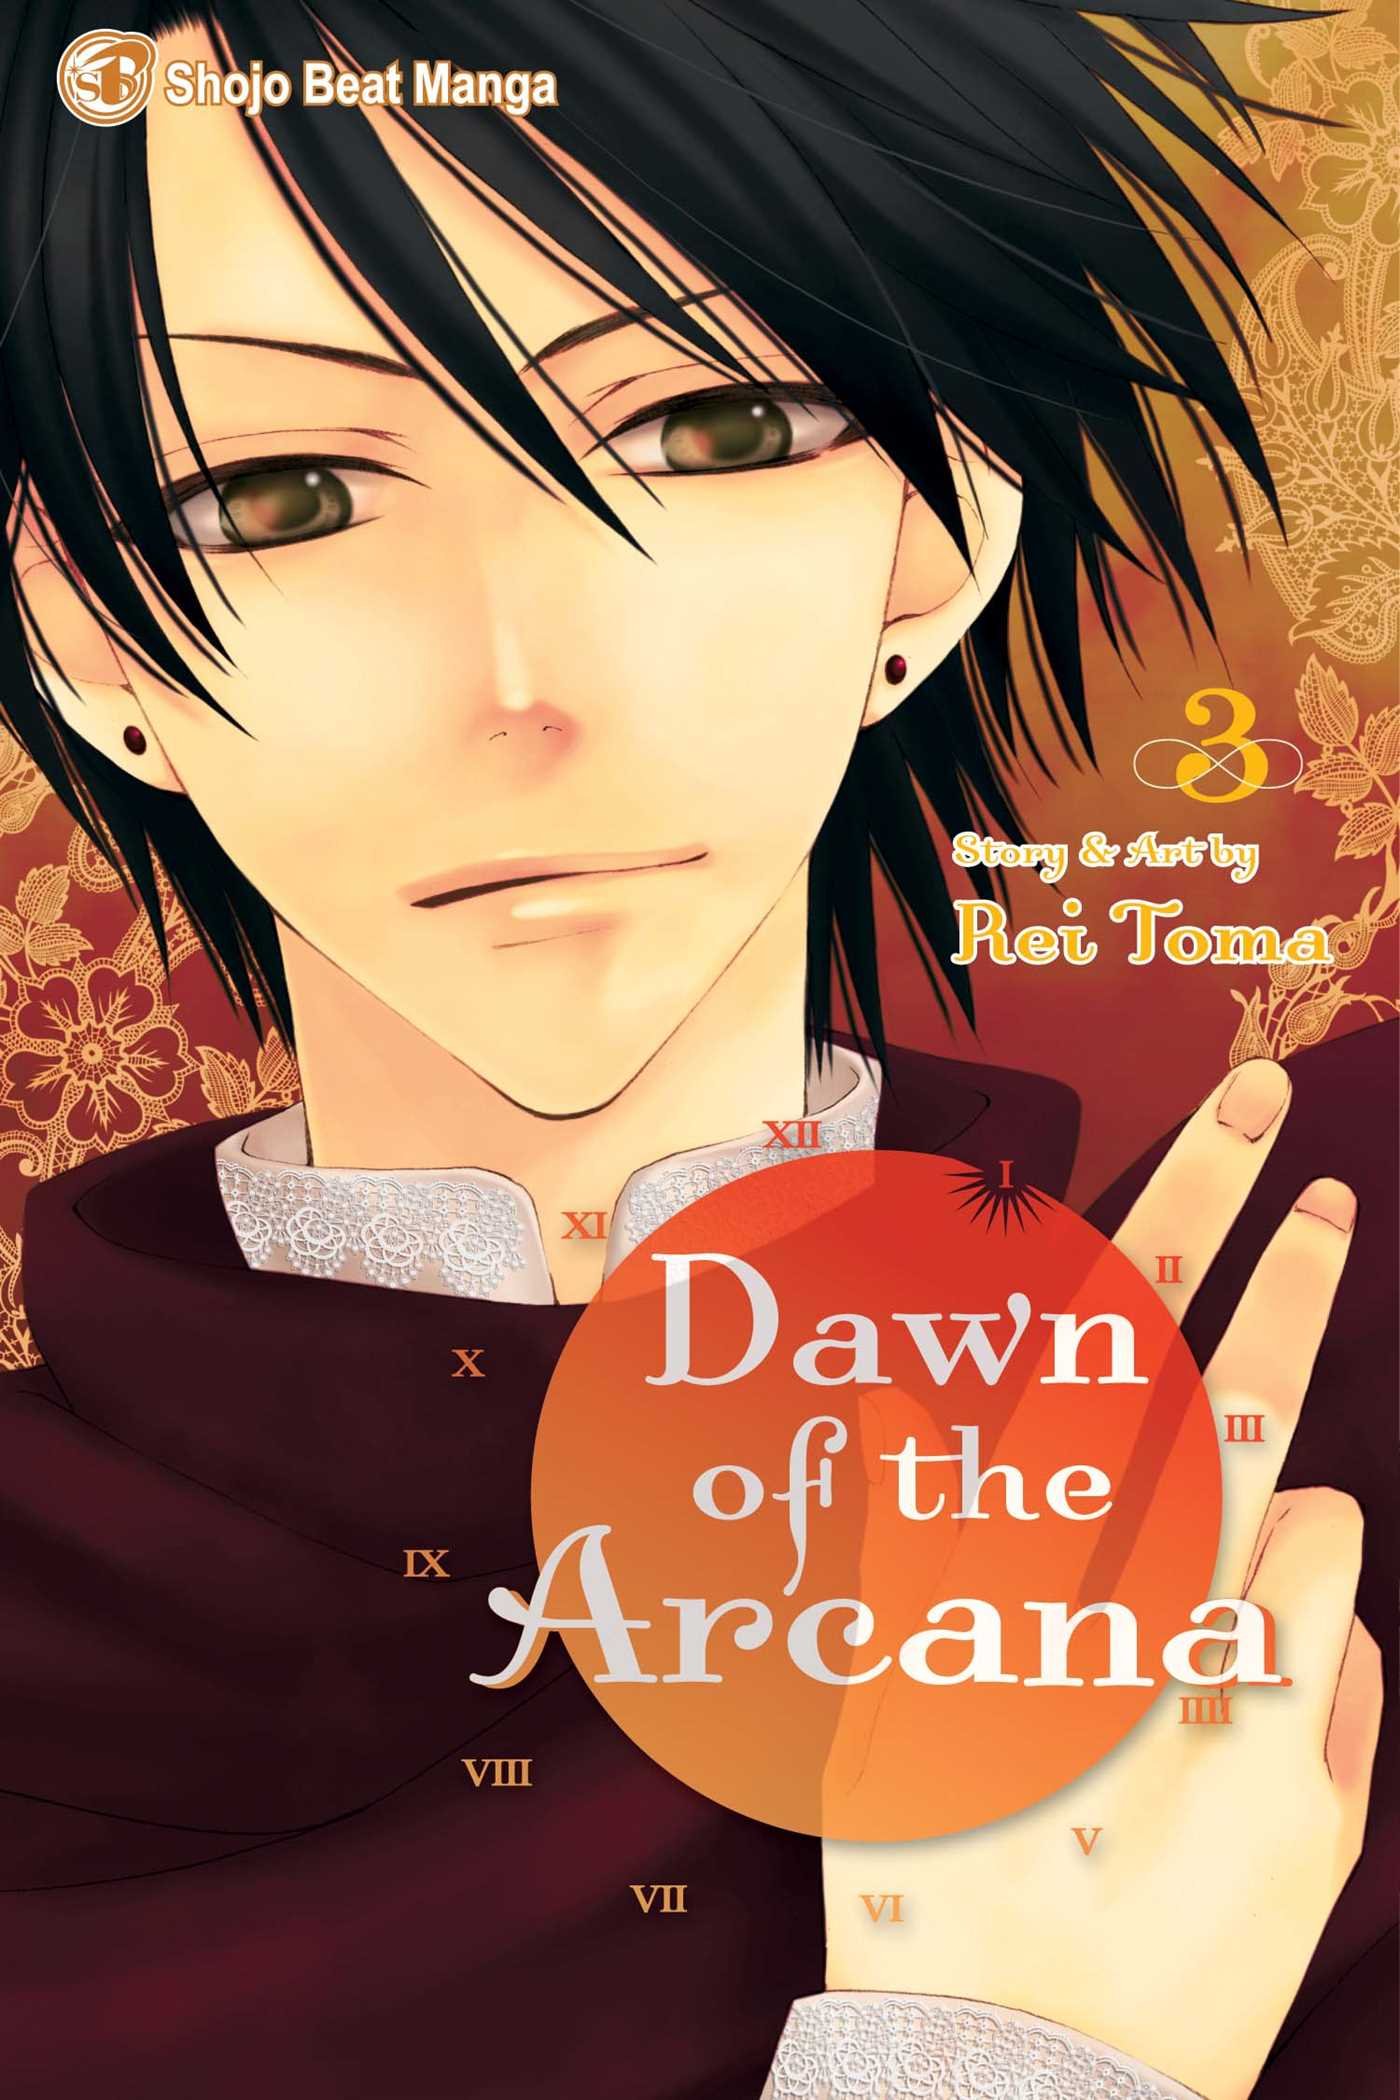 Dawn of the Arcana | Rei Toma